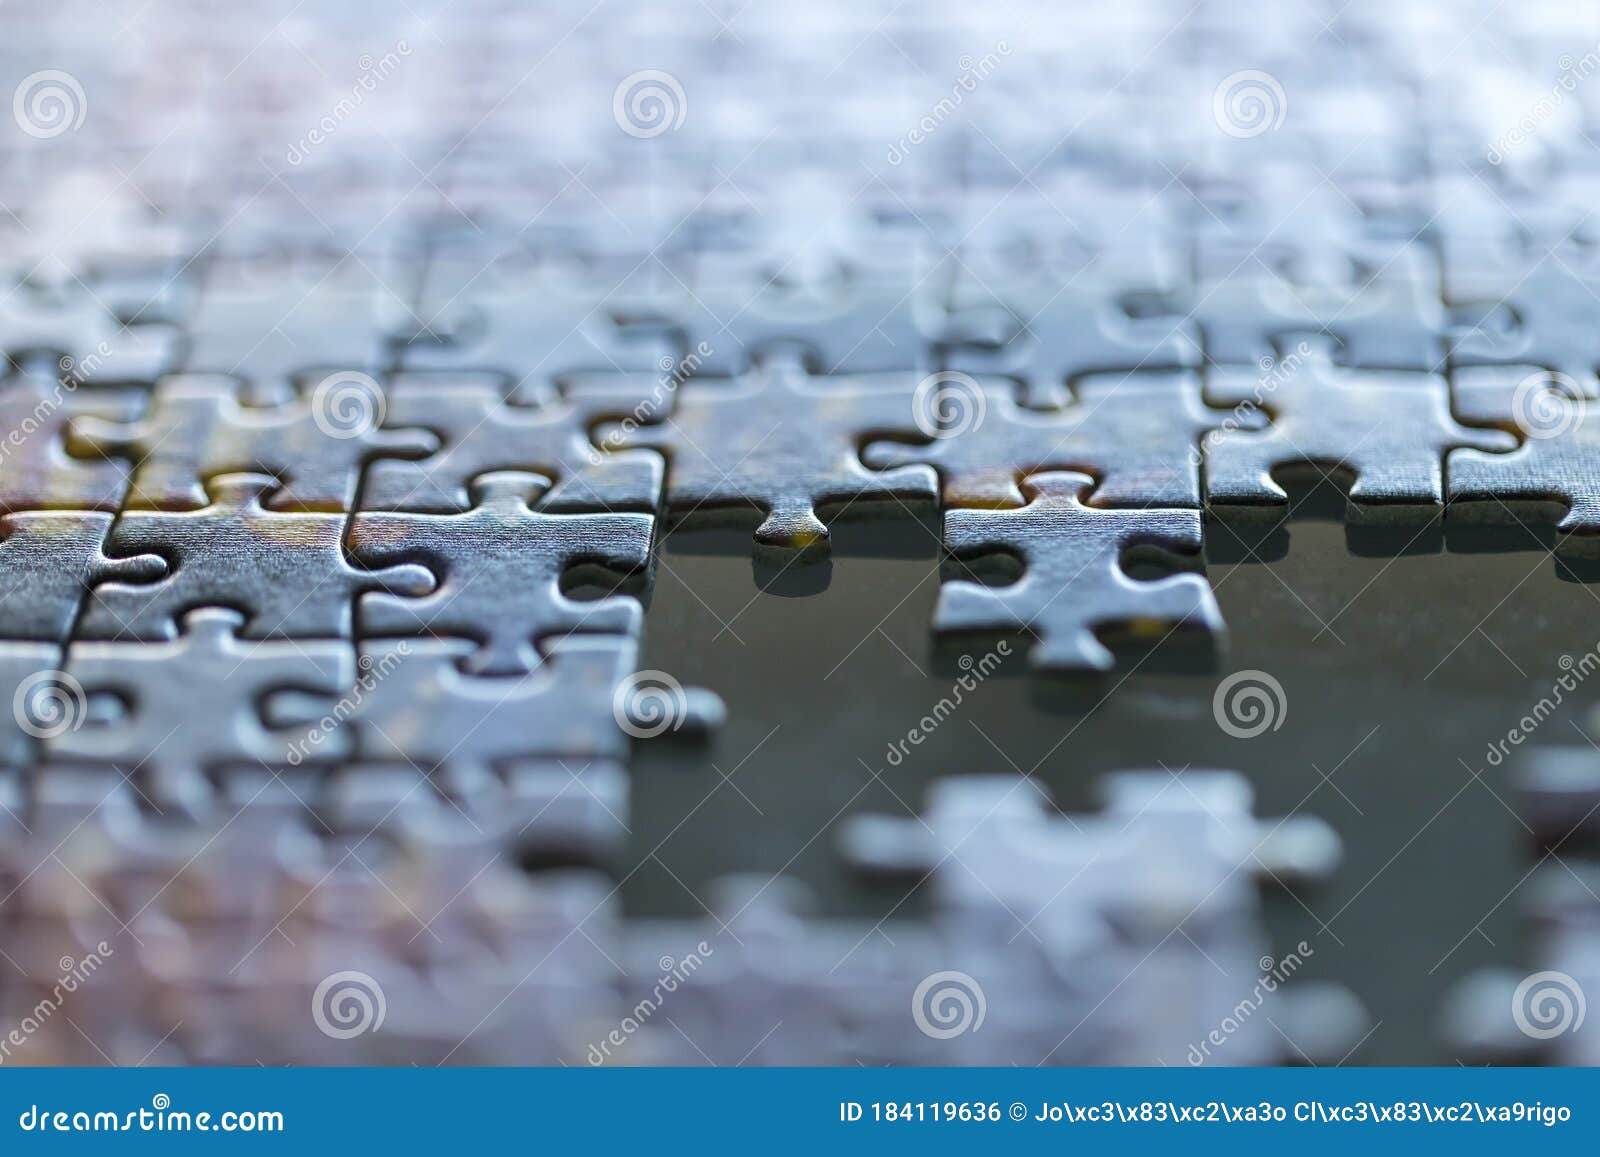 jigsaw incomplete puzzle missing pieces closeup background